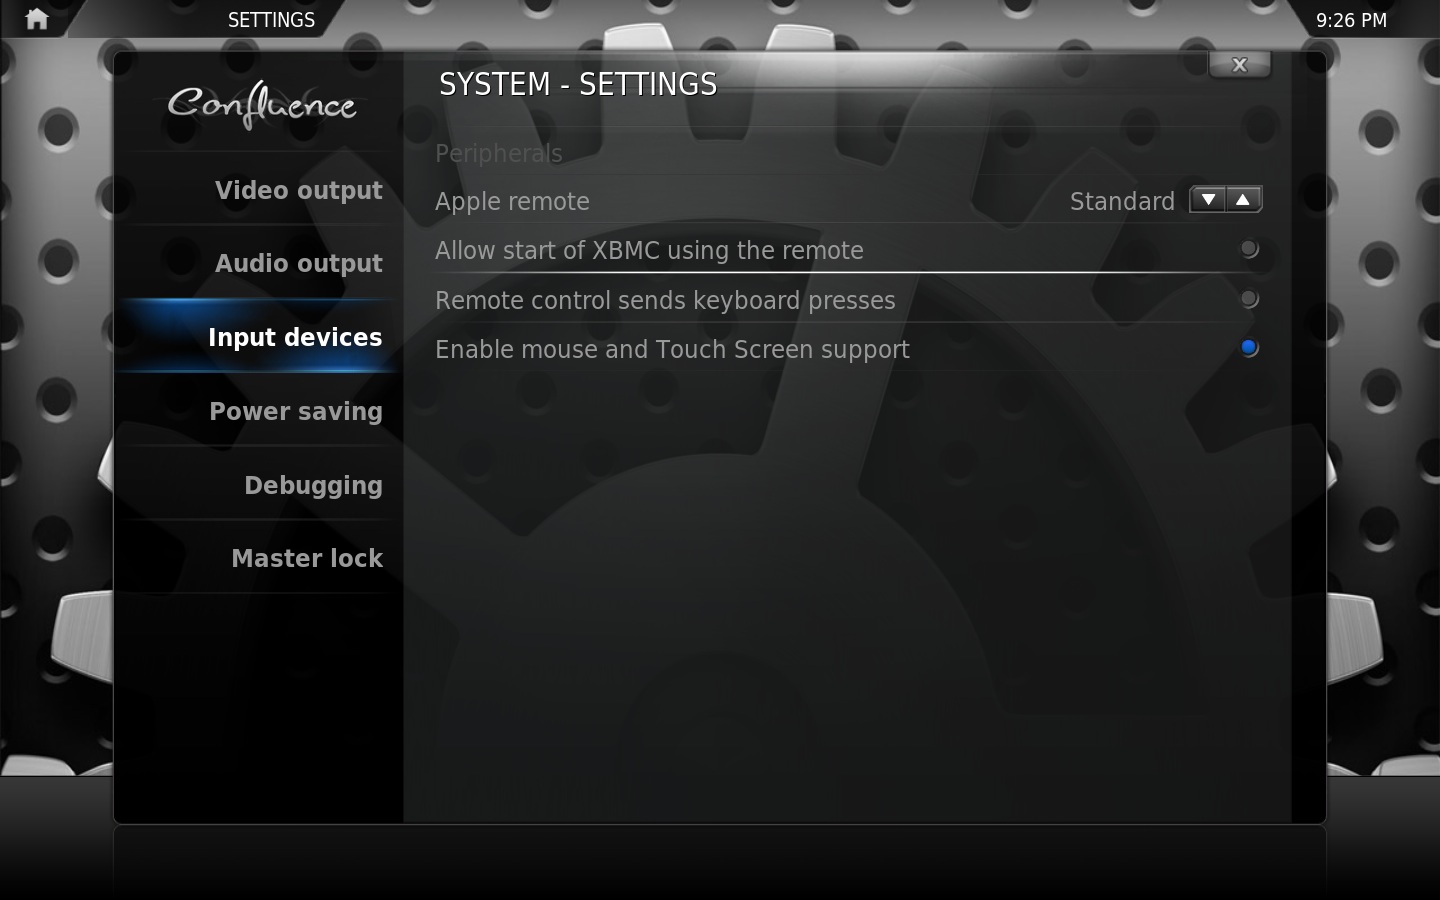 File:Settings.system.input devices.jpg